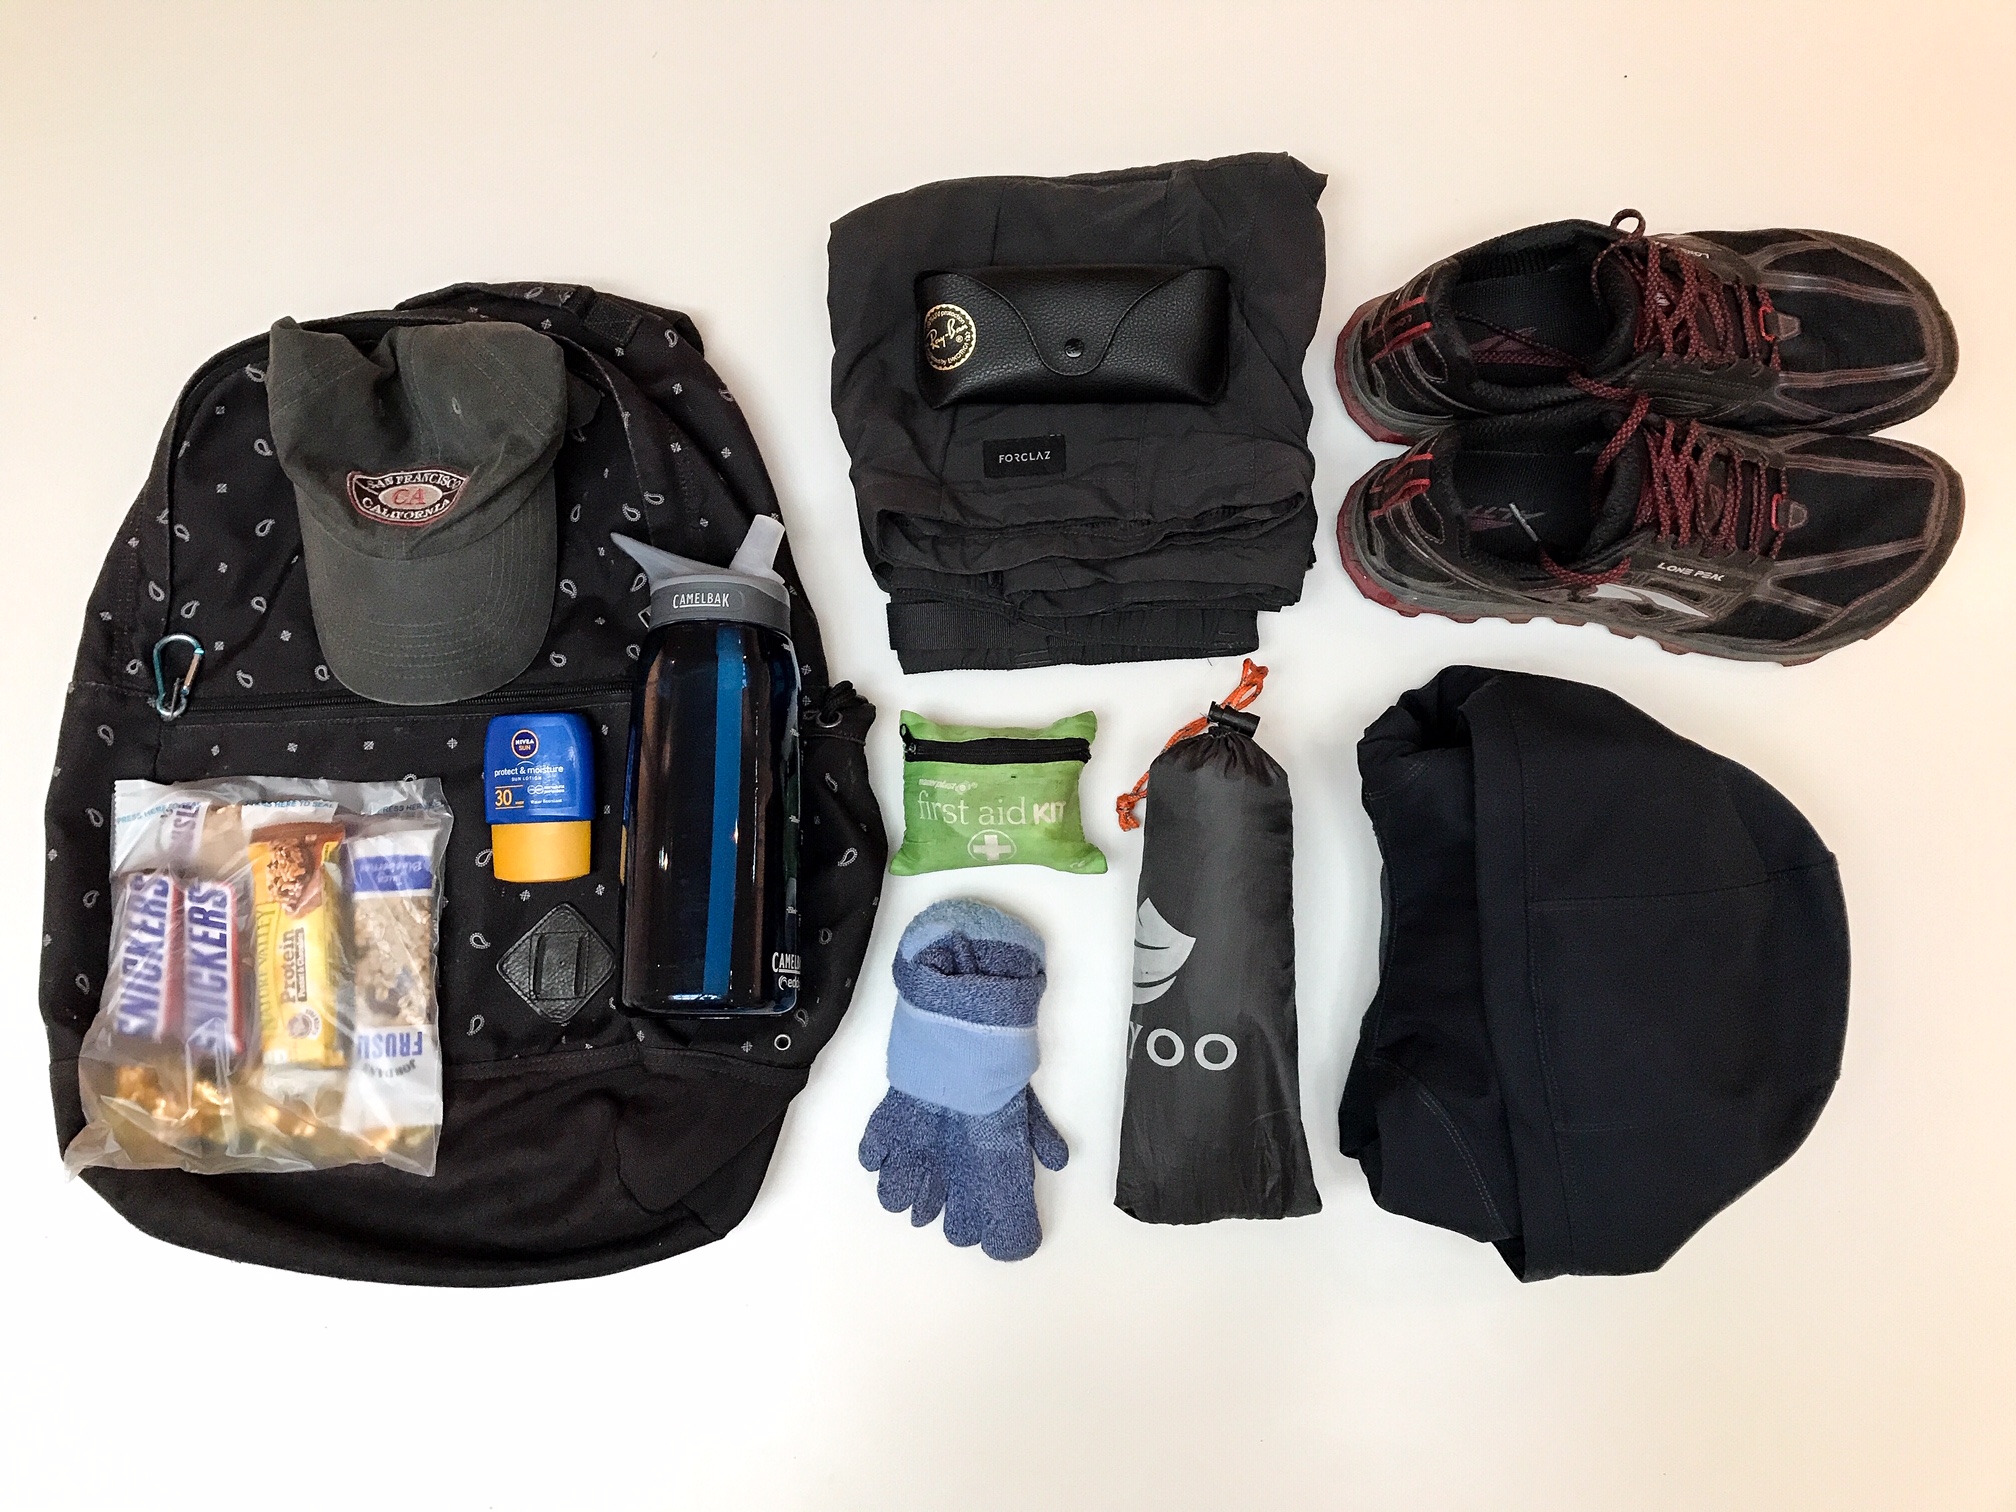 8 Hiking Essentials for a Day on the Trails, According to People